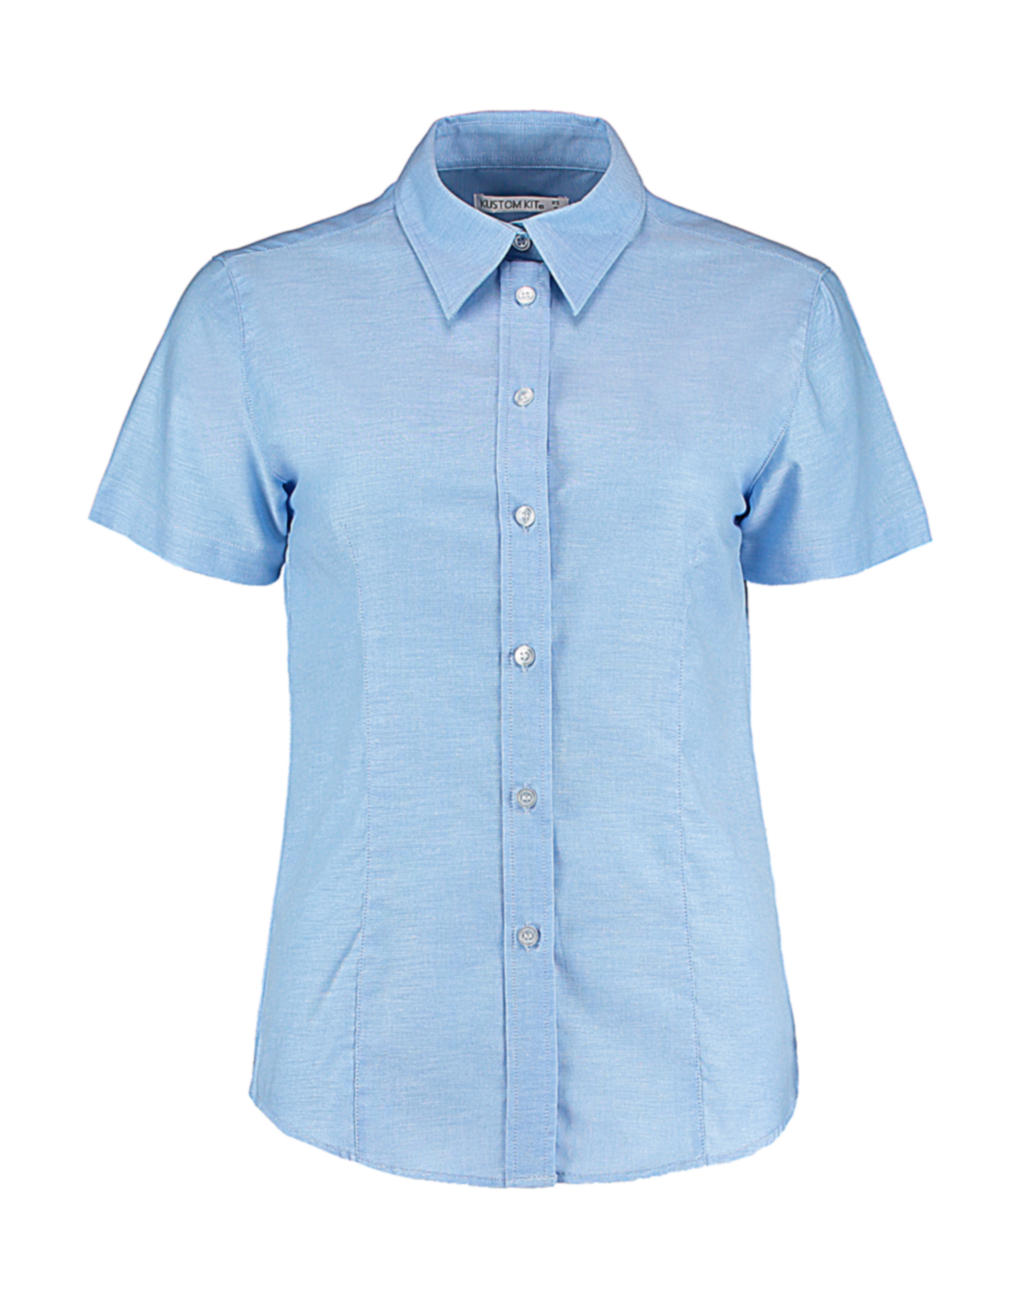  Womens Tailored Fit Workwear Oxford Shirt SSL in Farbe Light Blue